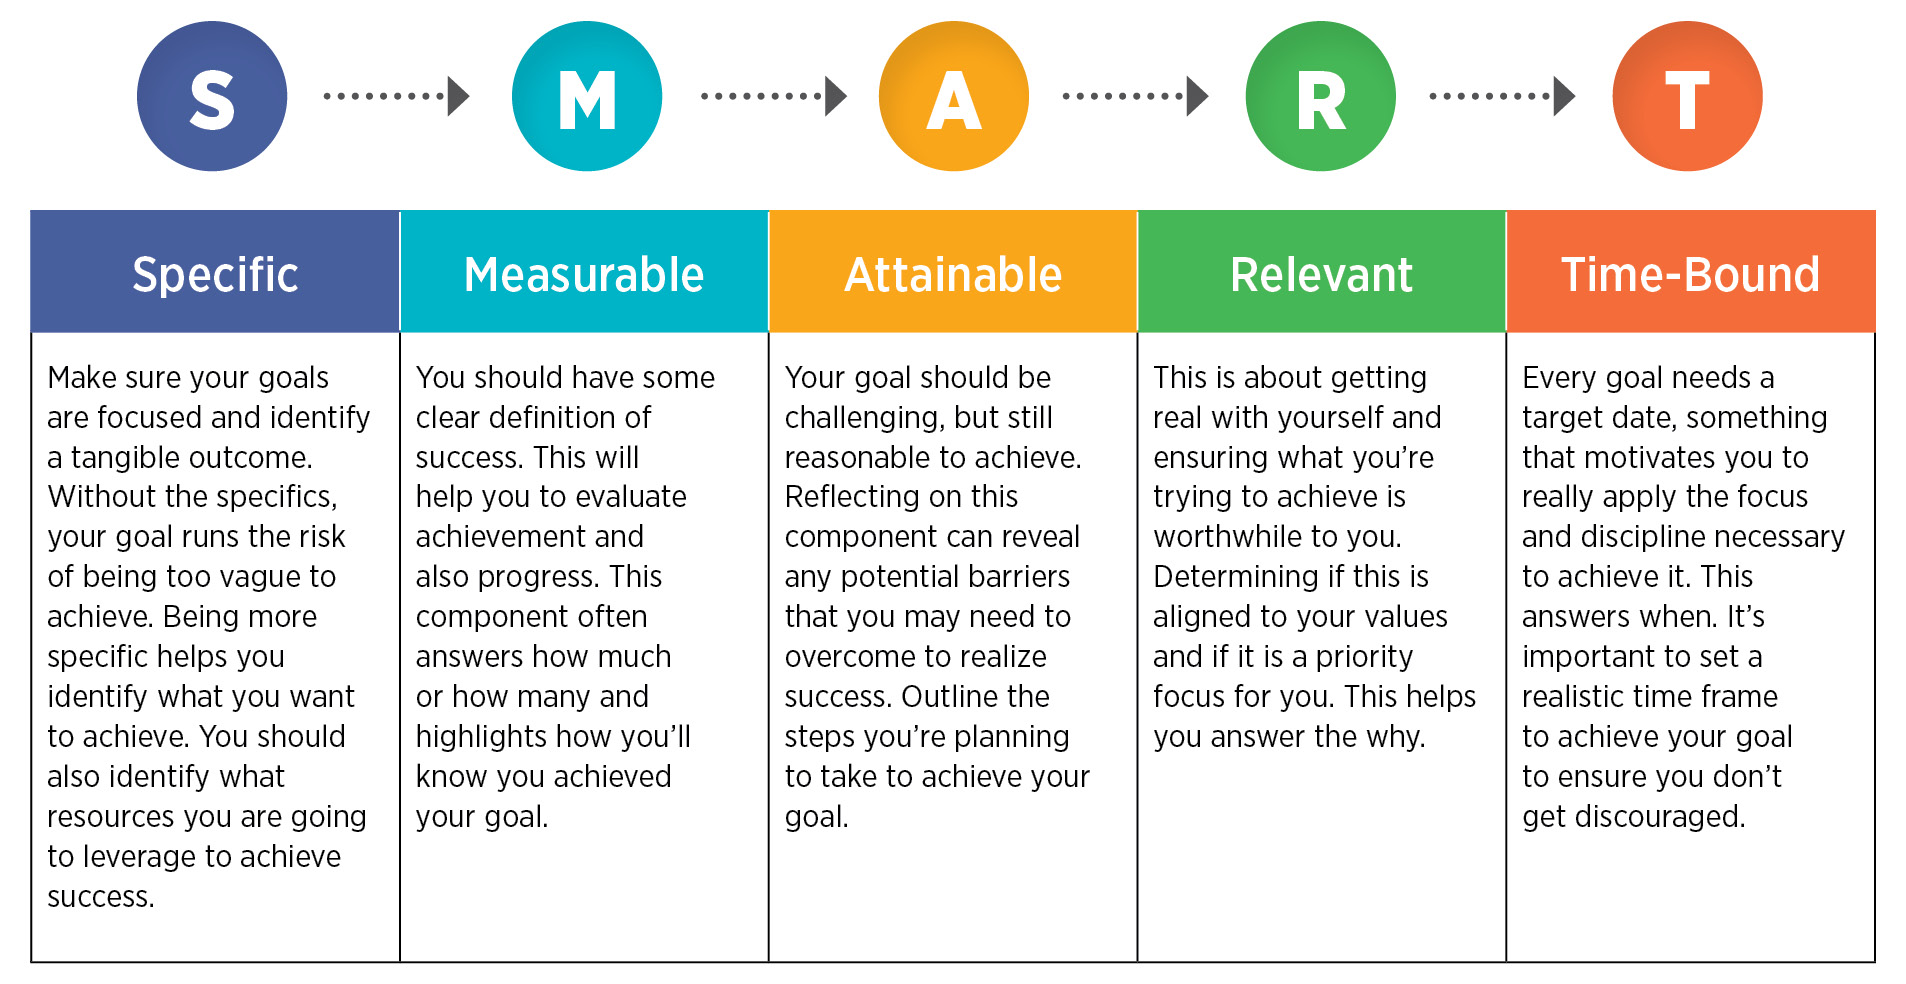  The image shows a table with five columns representing the acronym 'SMART', which stands for Specific, Measurable, Achievable, Relevant, and Time-bound. Each column provides a brief description of what each of these criteria means in relation to setting goals for advertising campaigns.